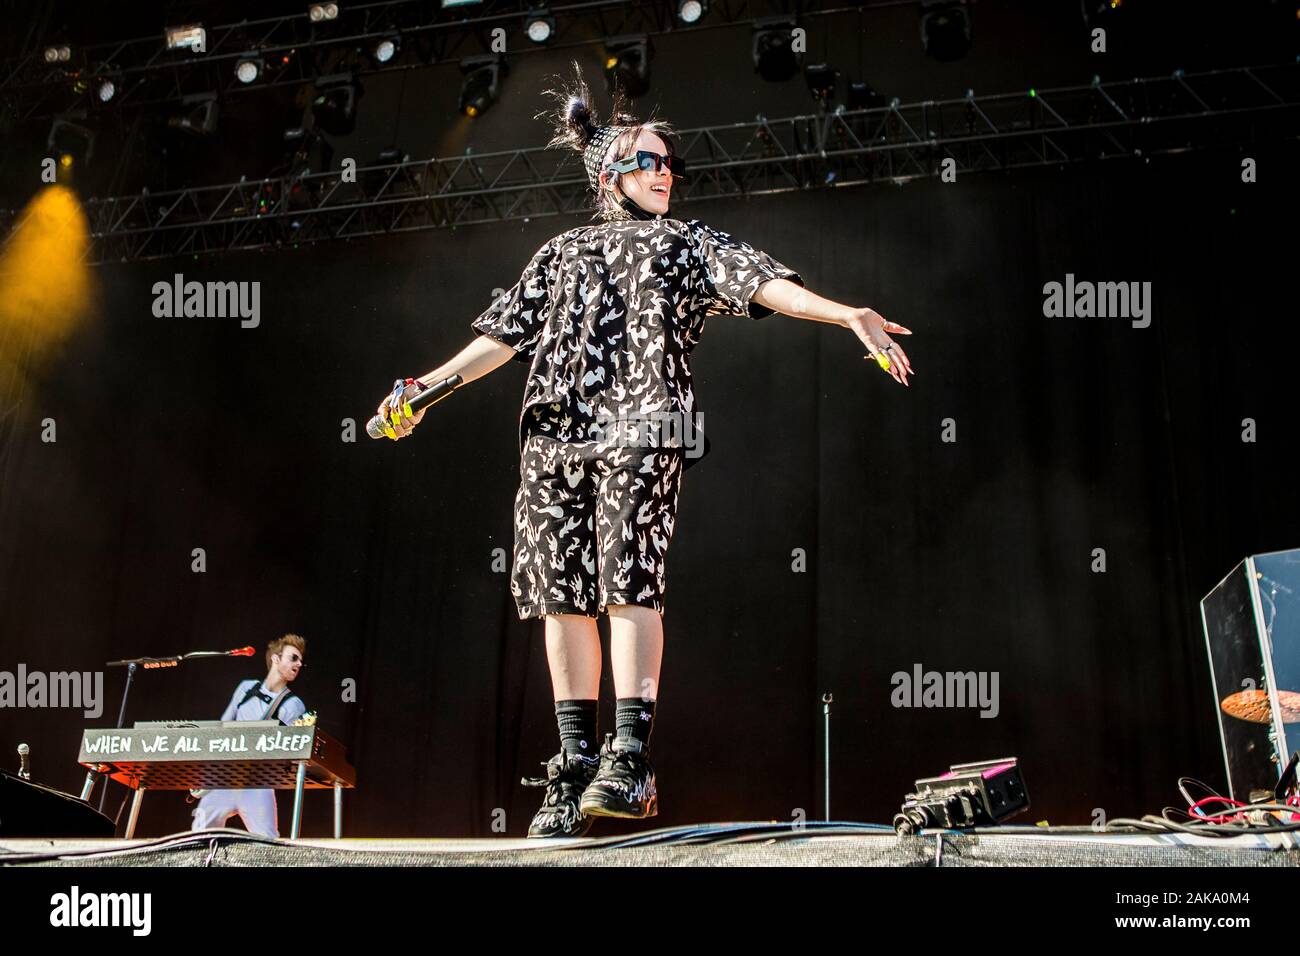 Odense, Denmark. 27th, June 2019. The American singer and songwriter performs a live concert during the Danish music festival Tinderbox 2019 in Odense. (Photo Gonzales Photo - Lasse